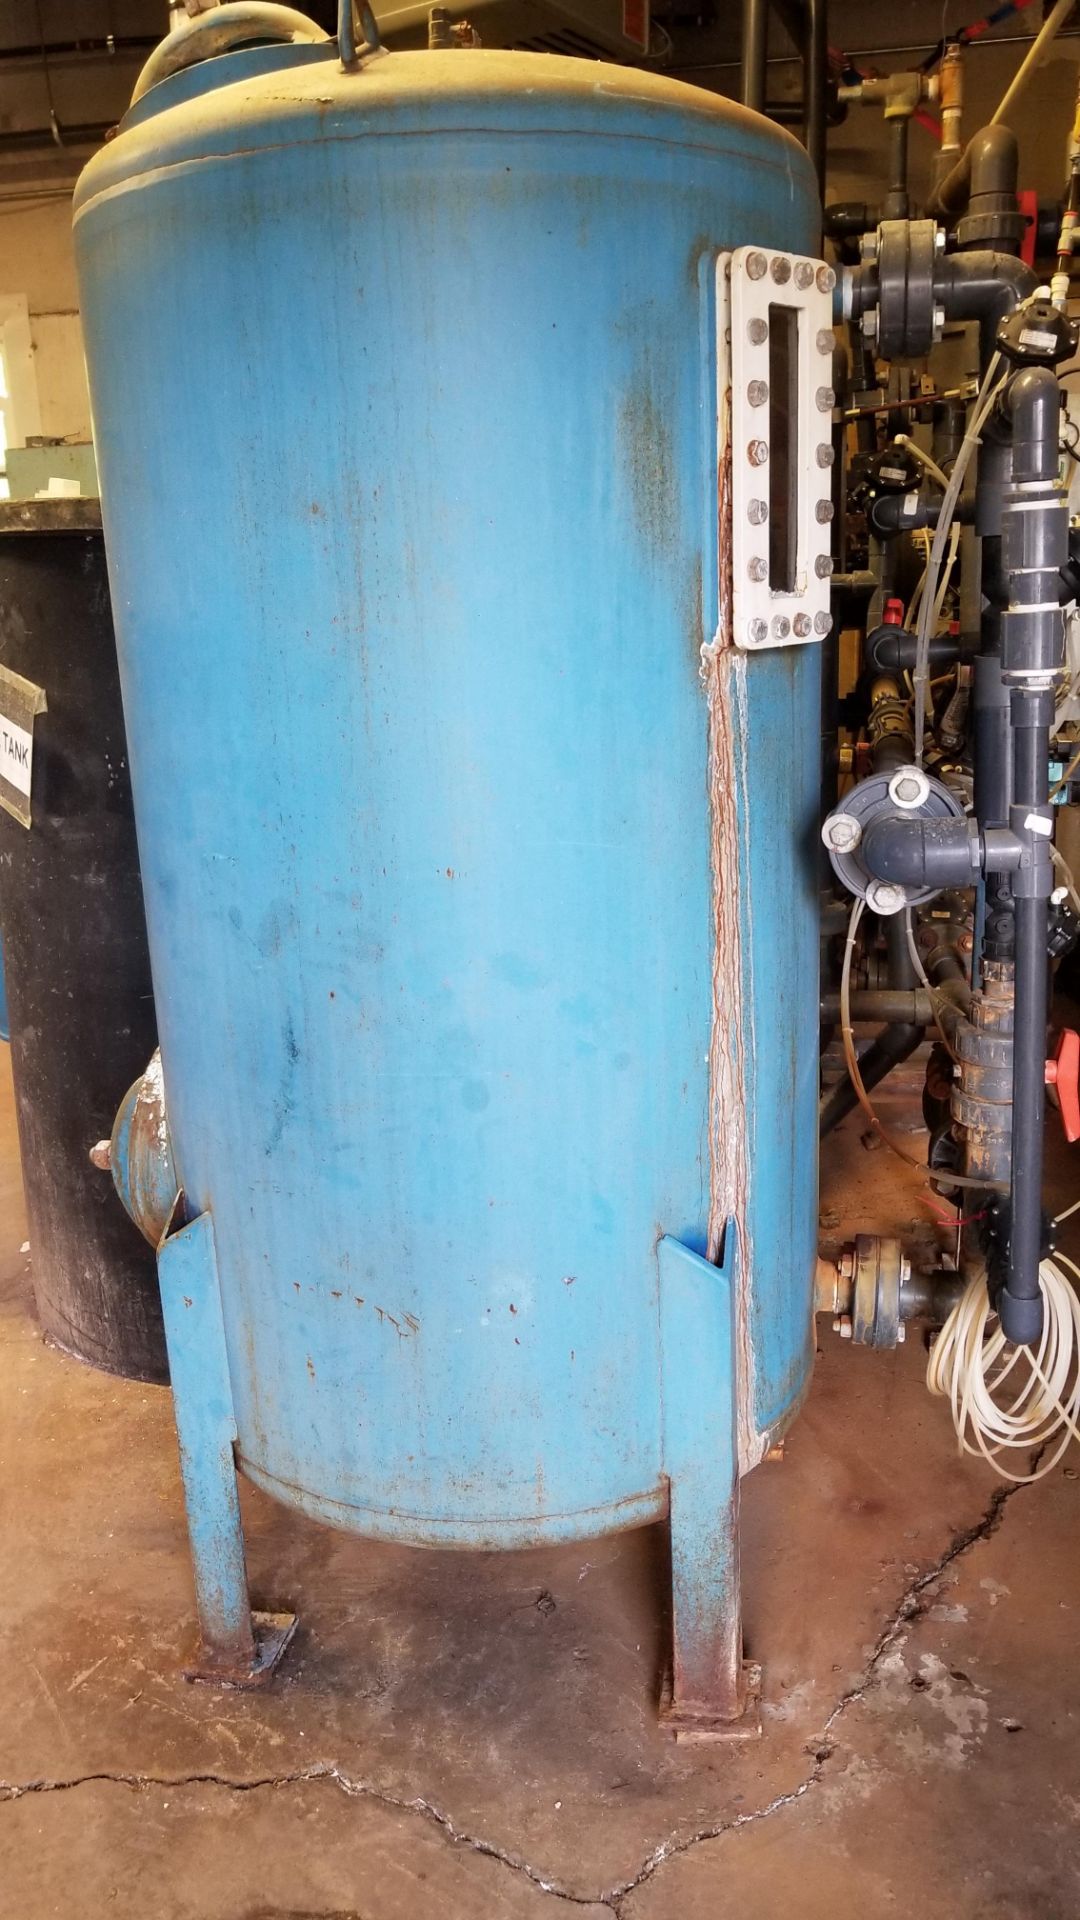 Glenwood Inglewood Water Filters (Loading Fee $500) (Located Dixon, IL) - Image 2 of 3